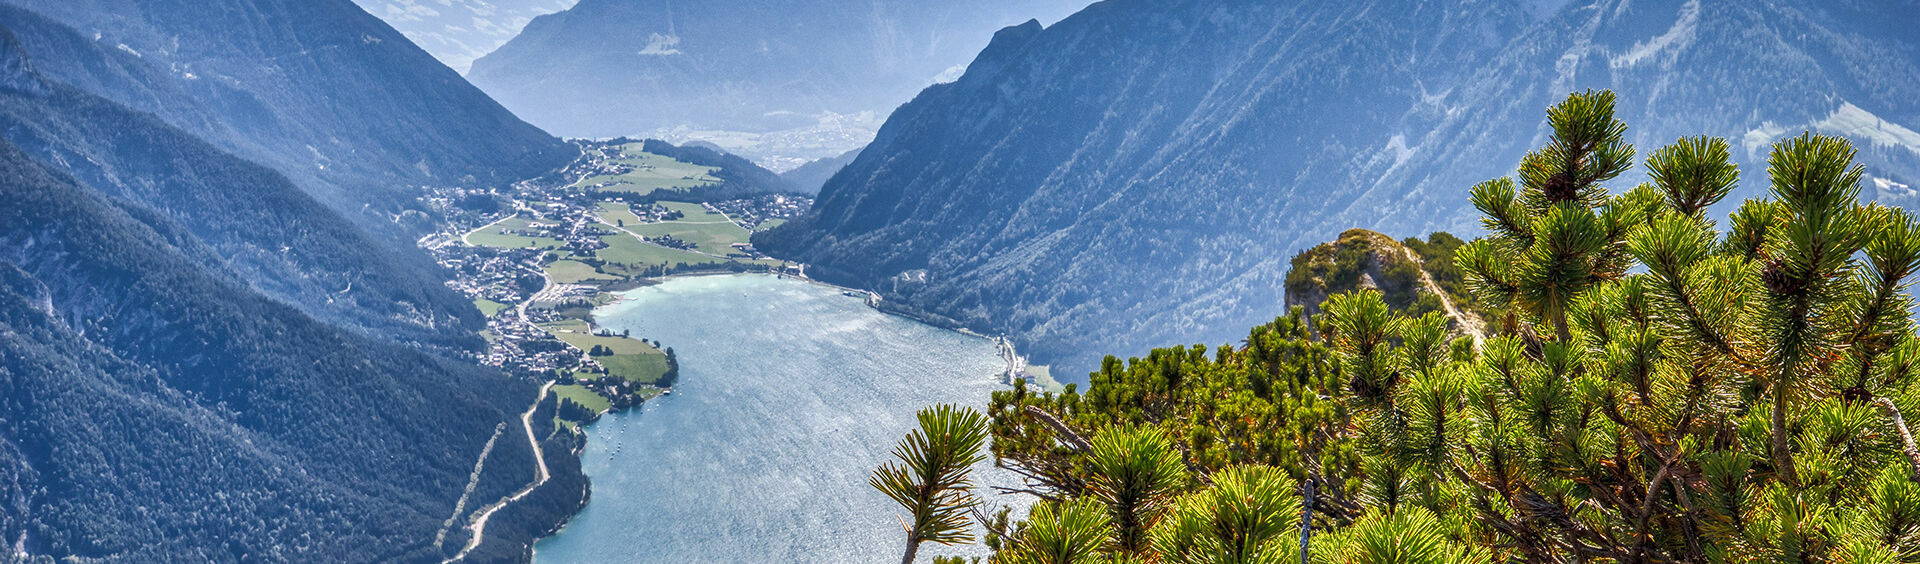 Climbing up the Seeberg rewards hikers with spectacular views of Lake Achensee and its surrounding mountains.